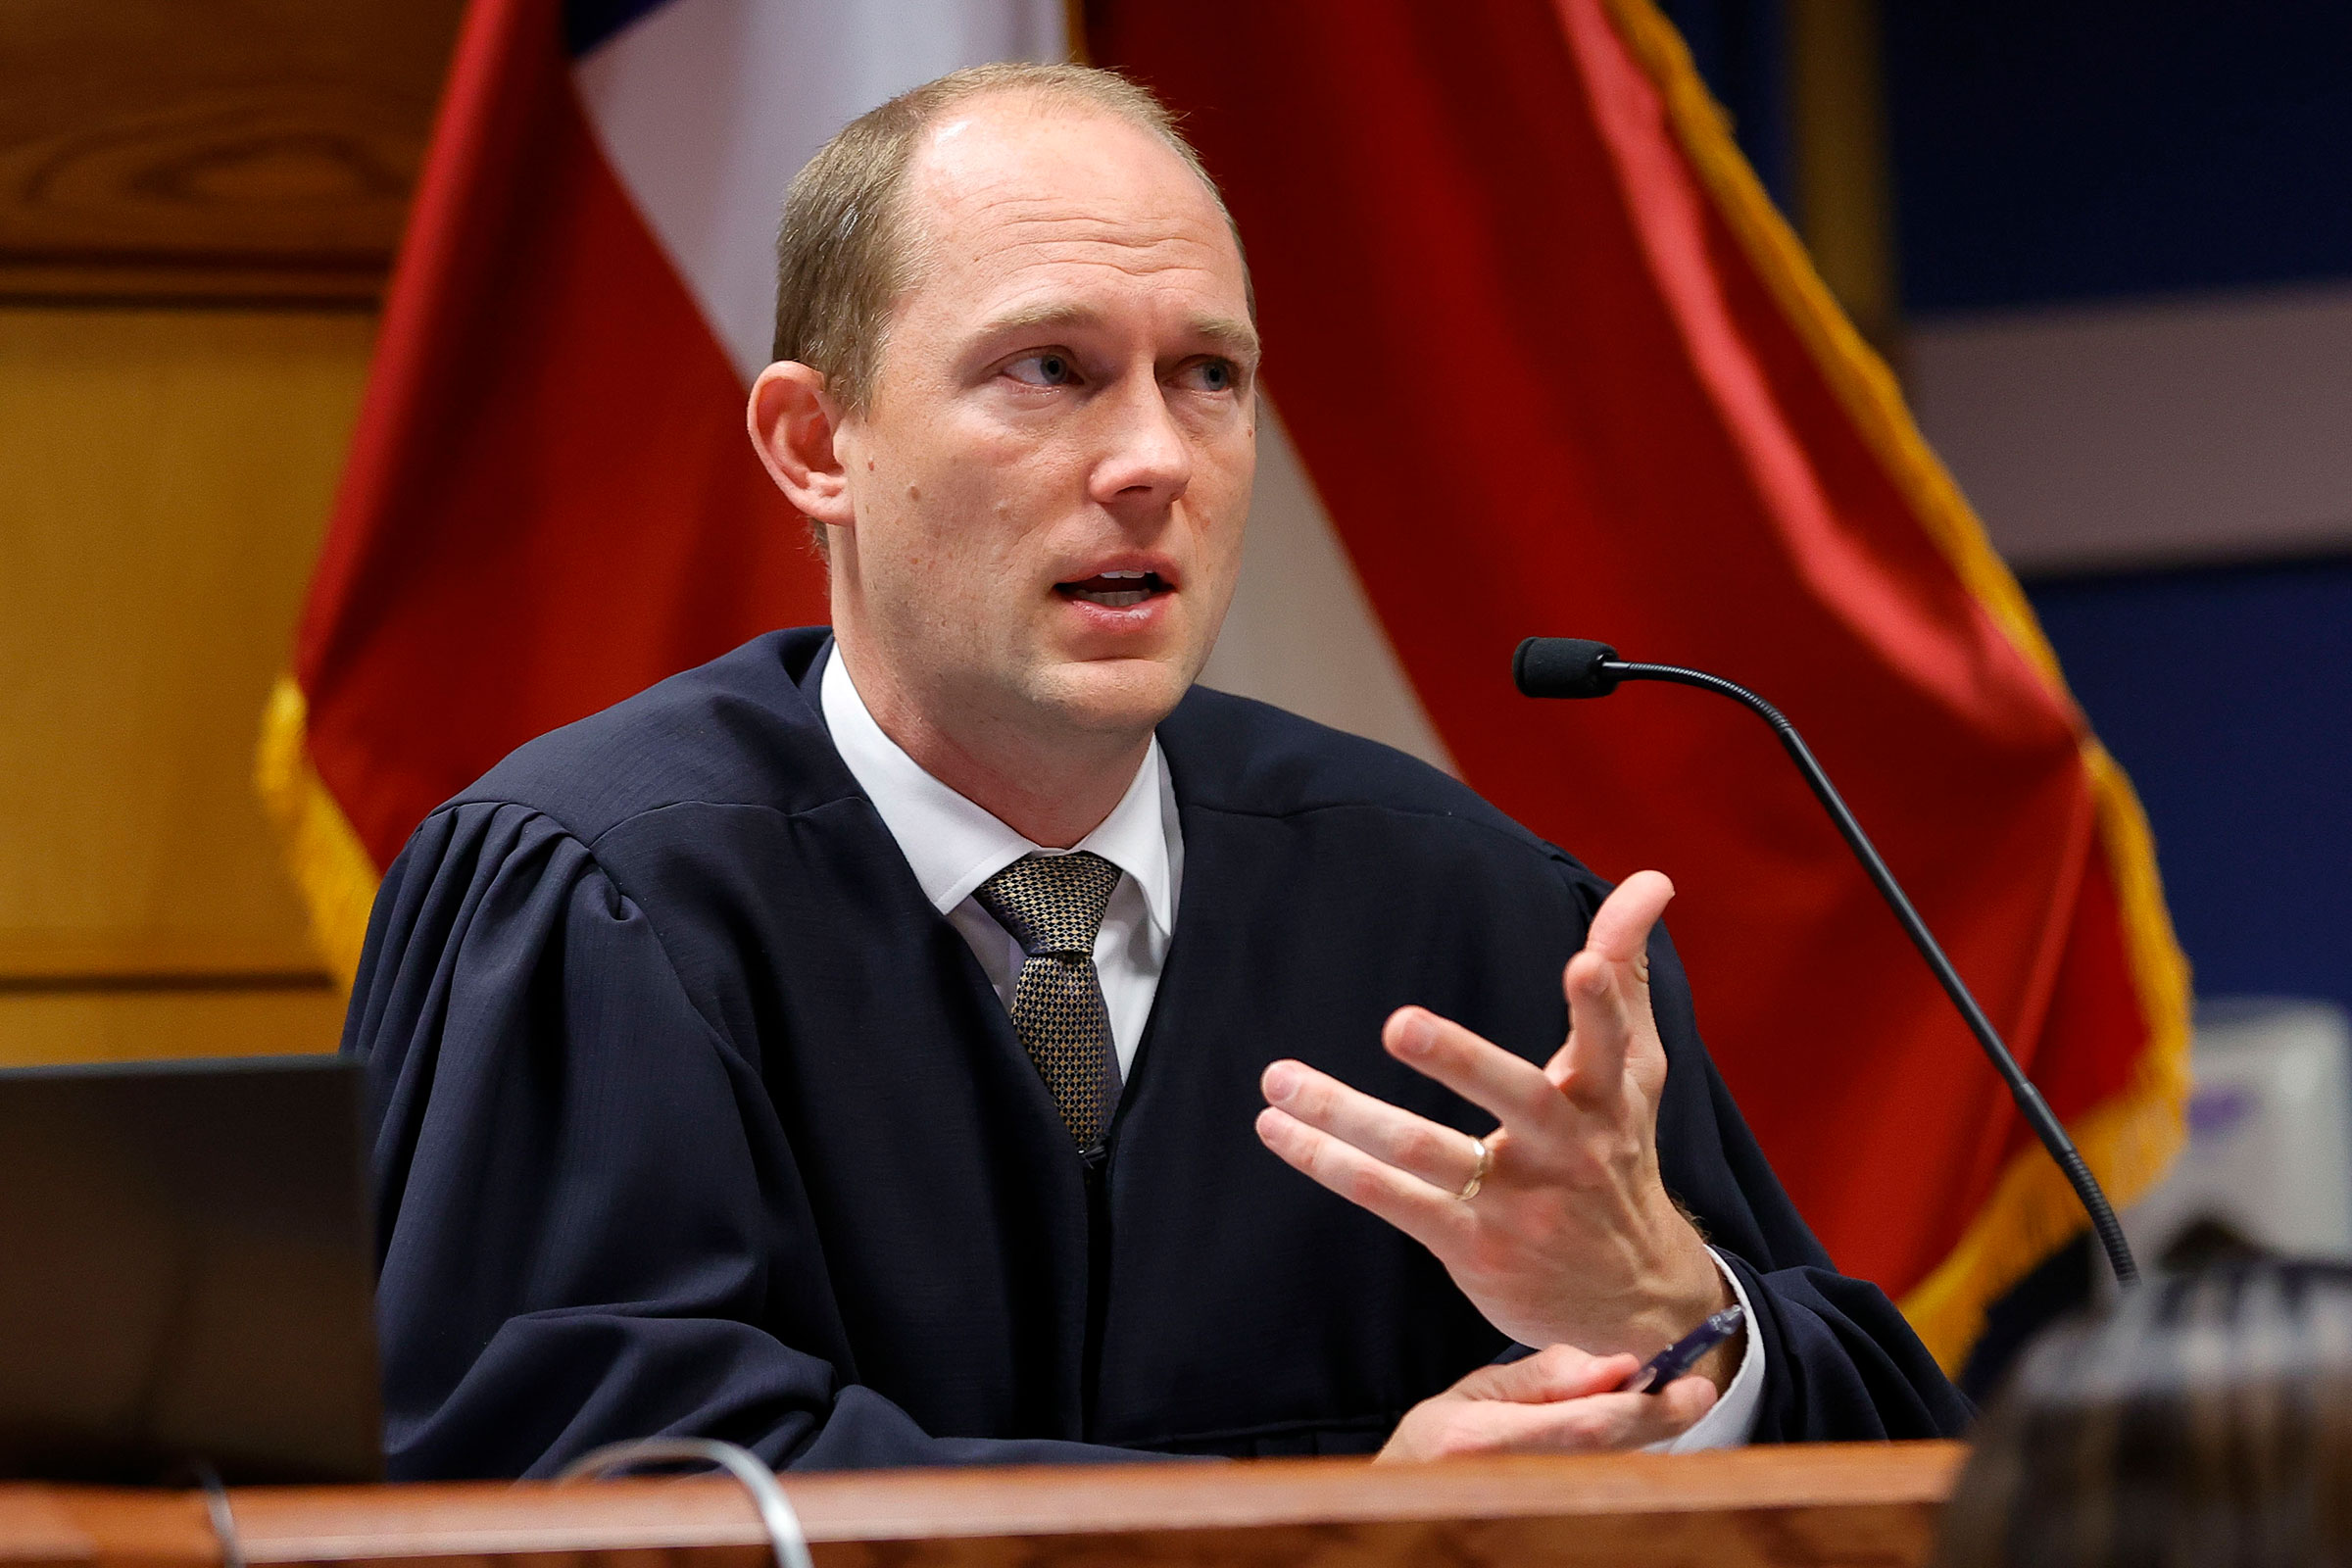 Fulton County Superior Judge Scott McAfee presides in court during a hearing in the case of the State of Georgia v. Donald John Trump at the Fulton County Courthouse on March 1 in Atlanta.